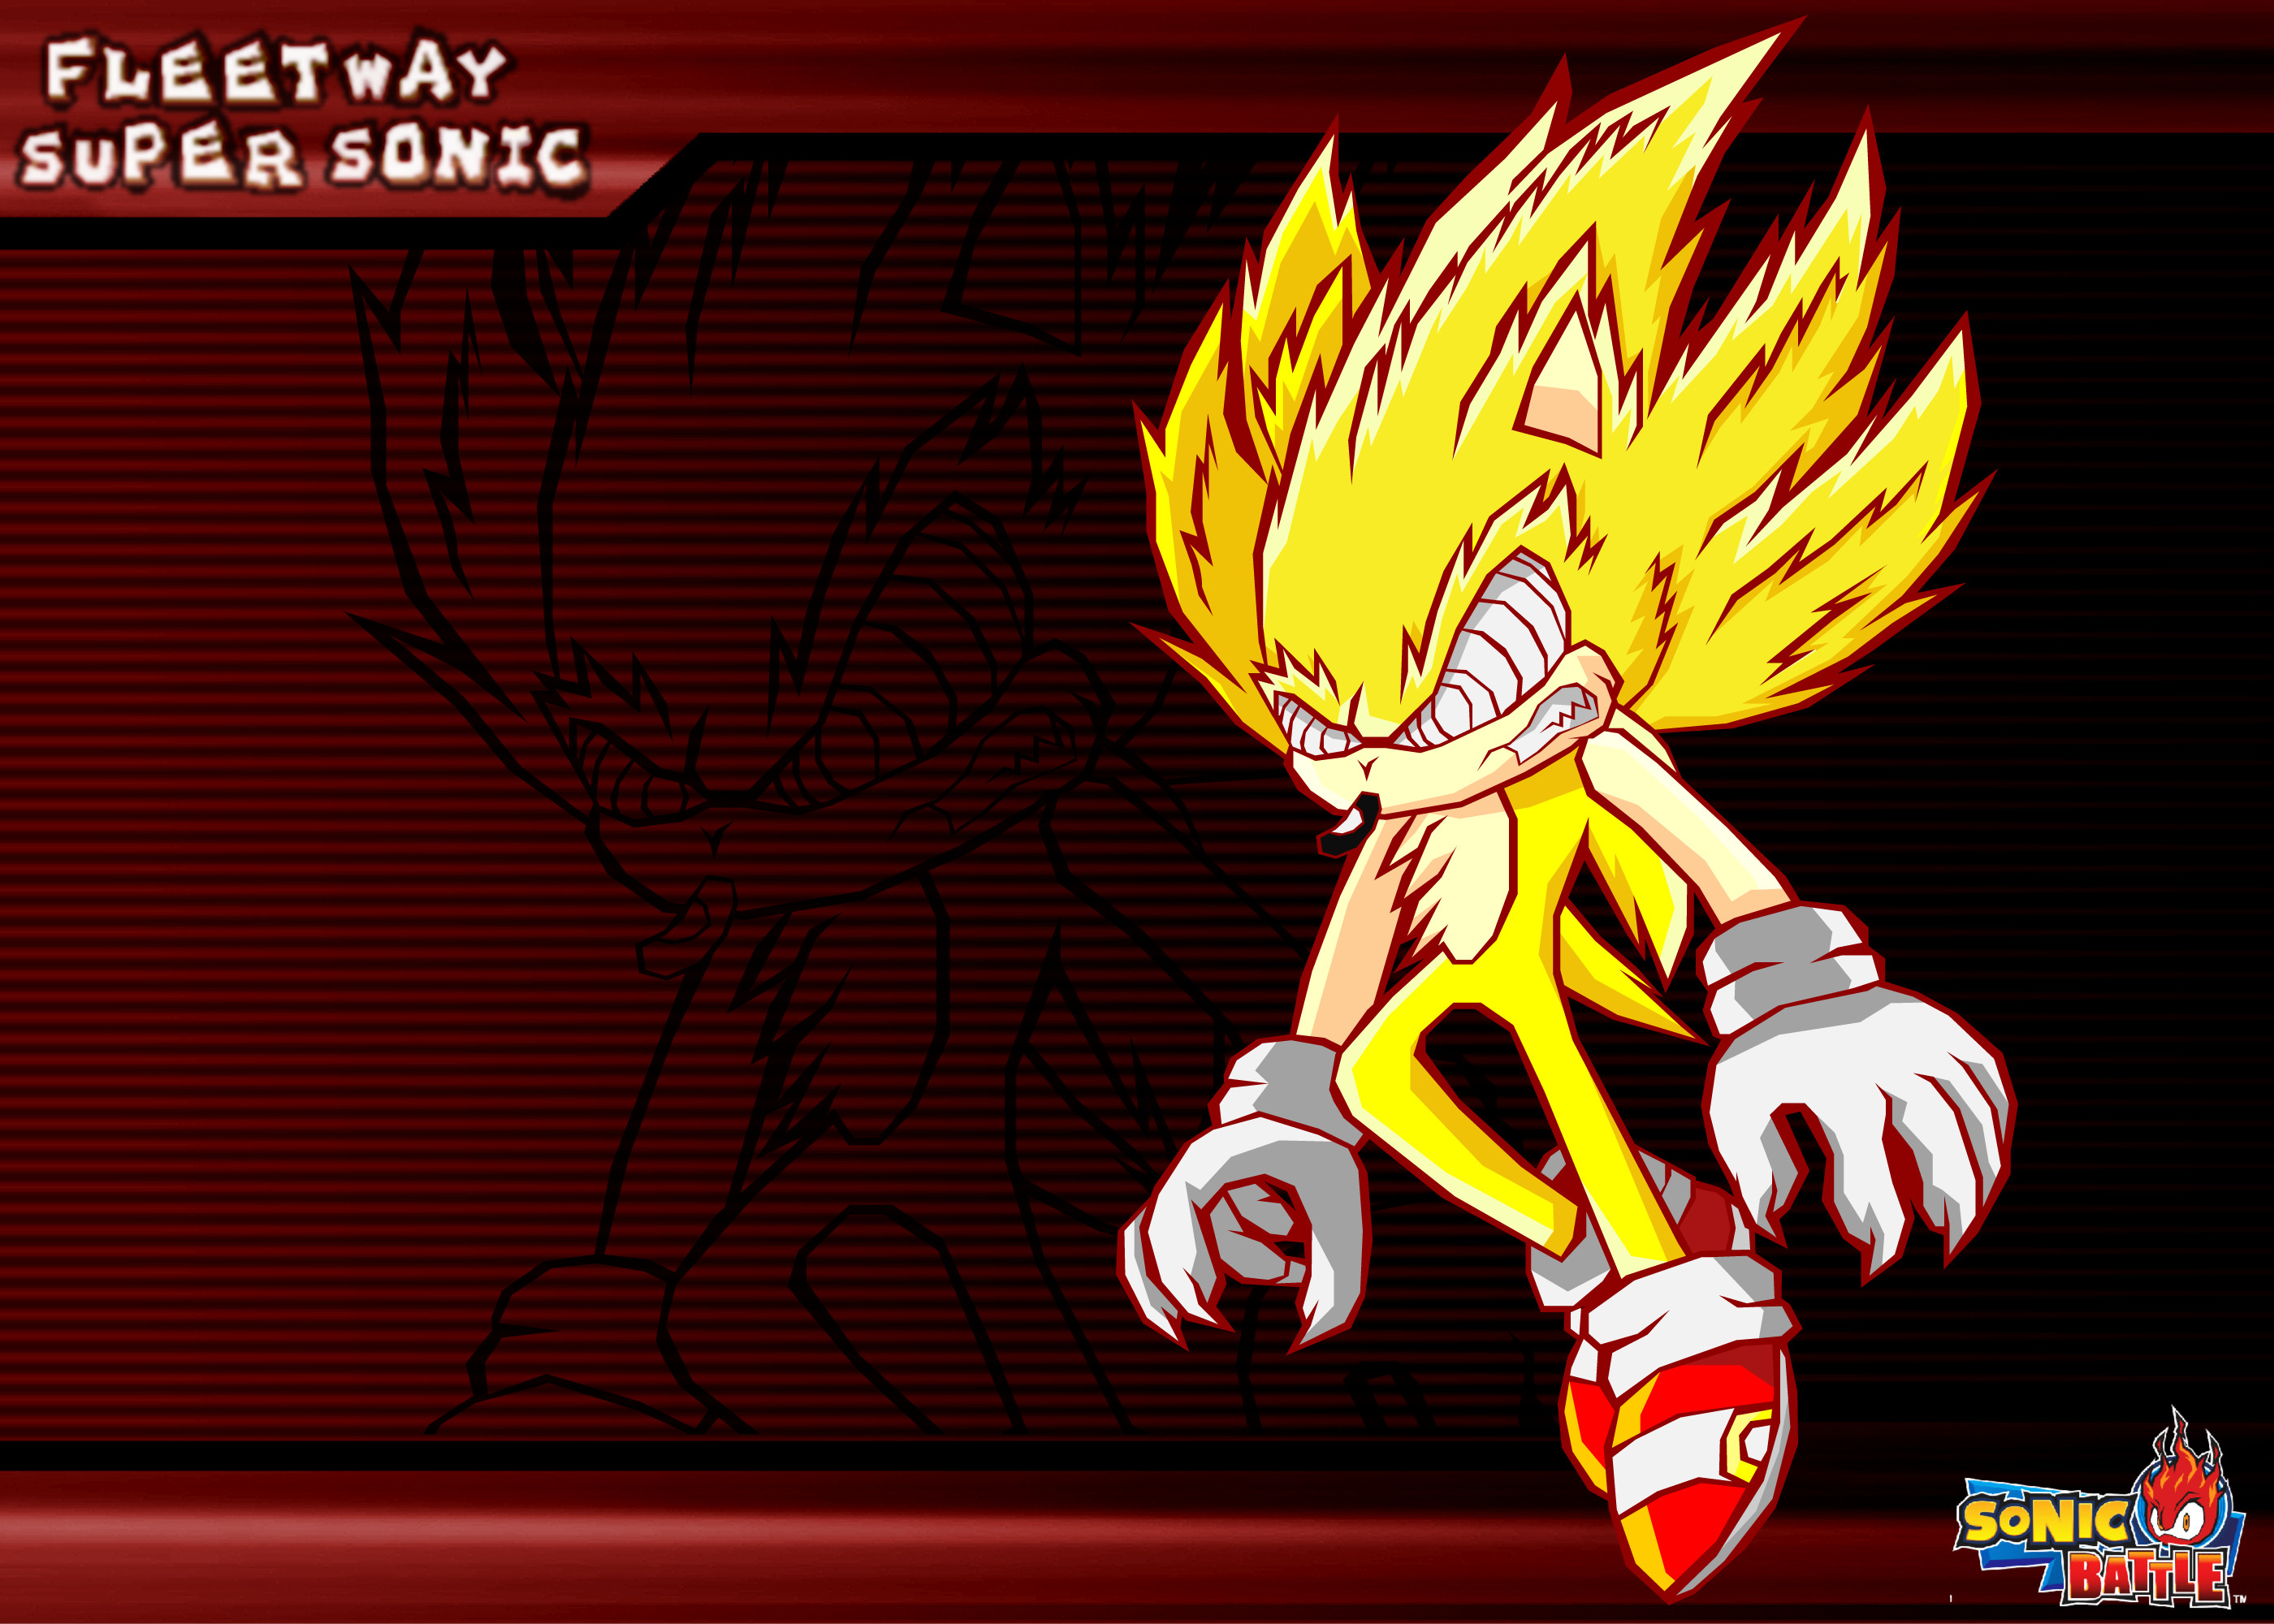 2800x2000 Sonic Wallpaper - Wallpapers Browse Sonic the Hedgehog - Super Sonic...Oh  my gosh.